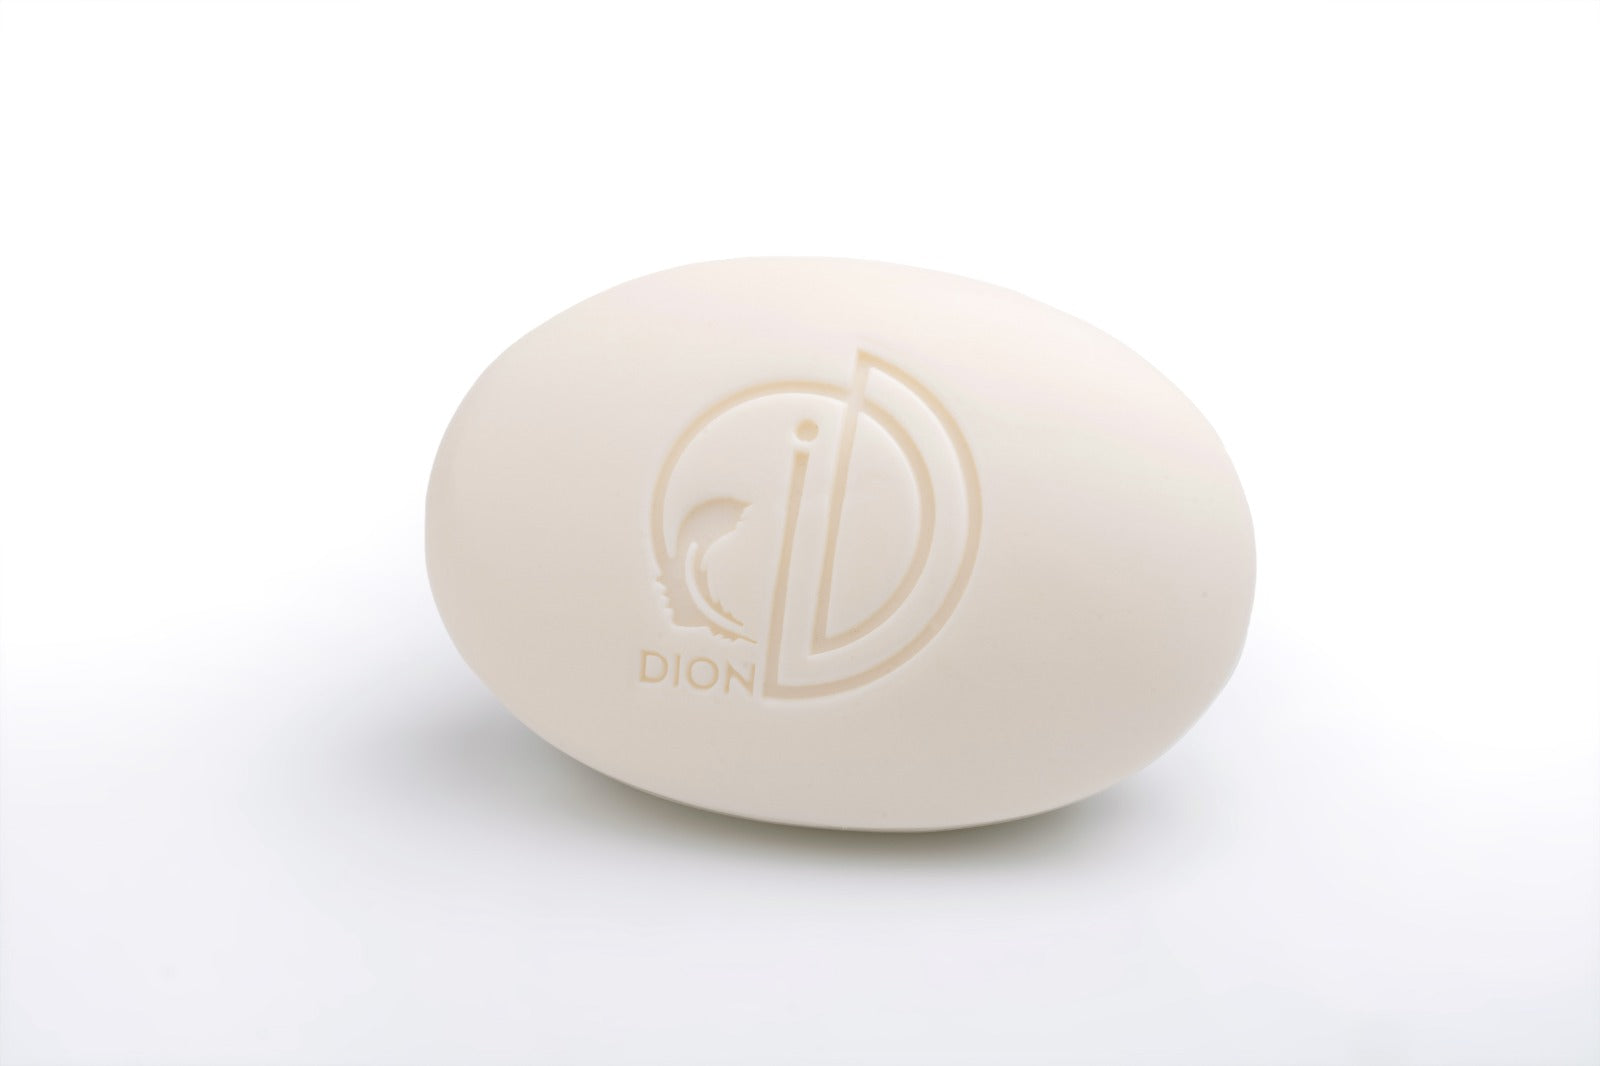 Dion Whitening Soap 100 gm